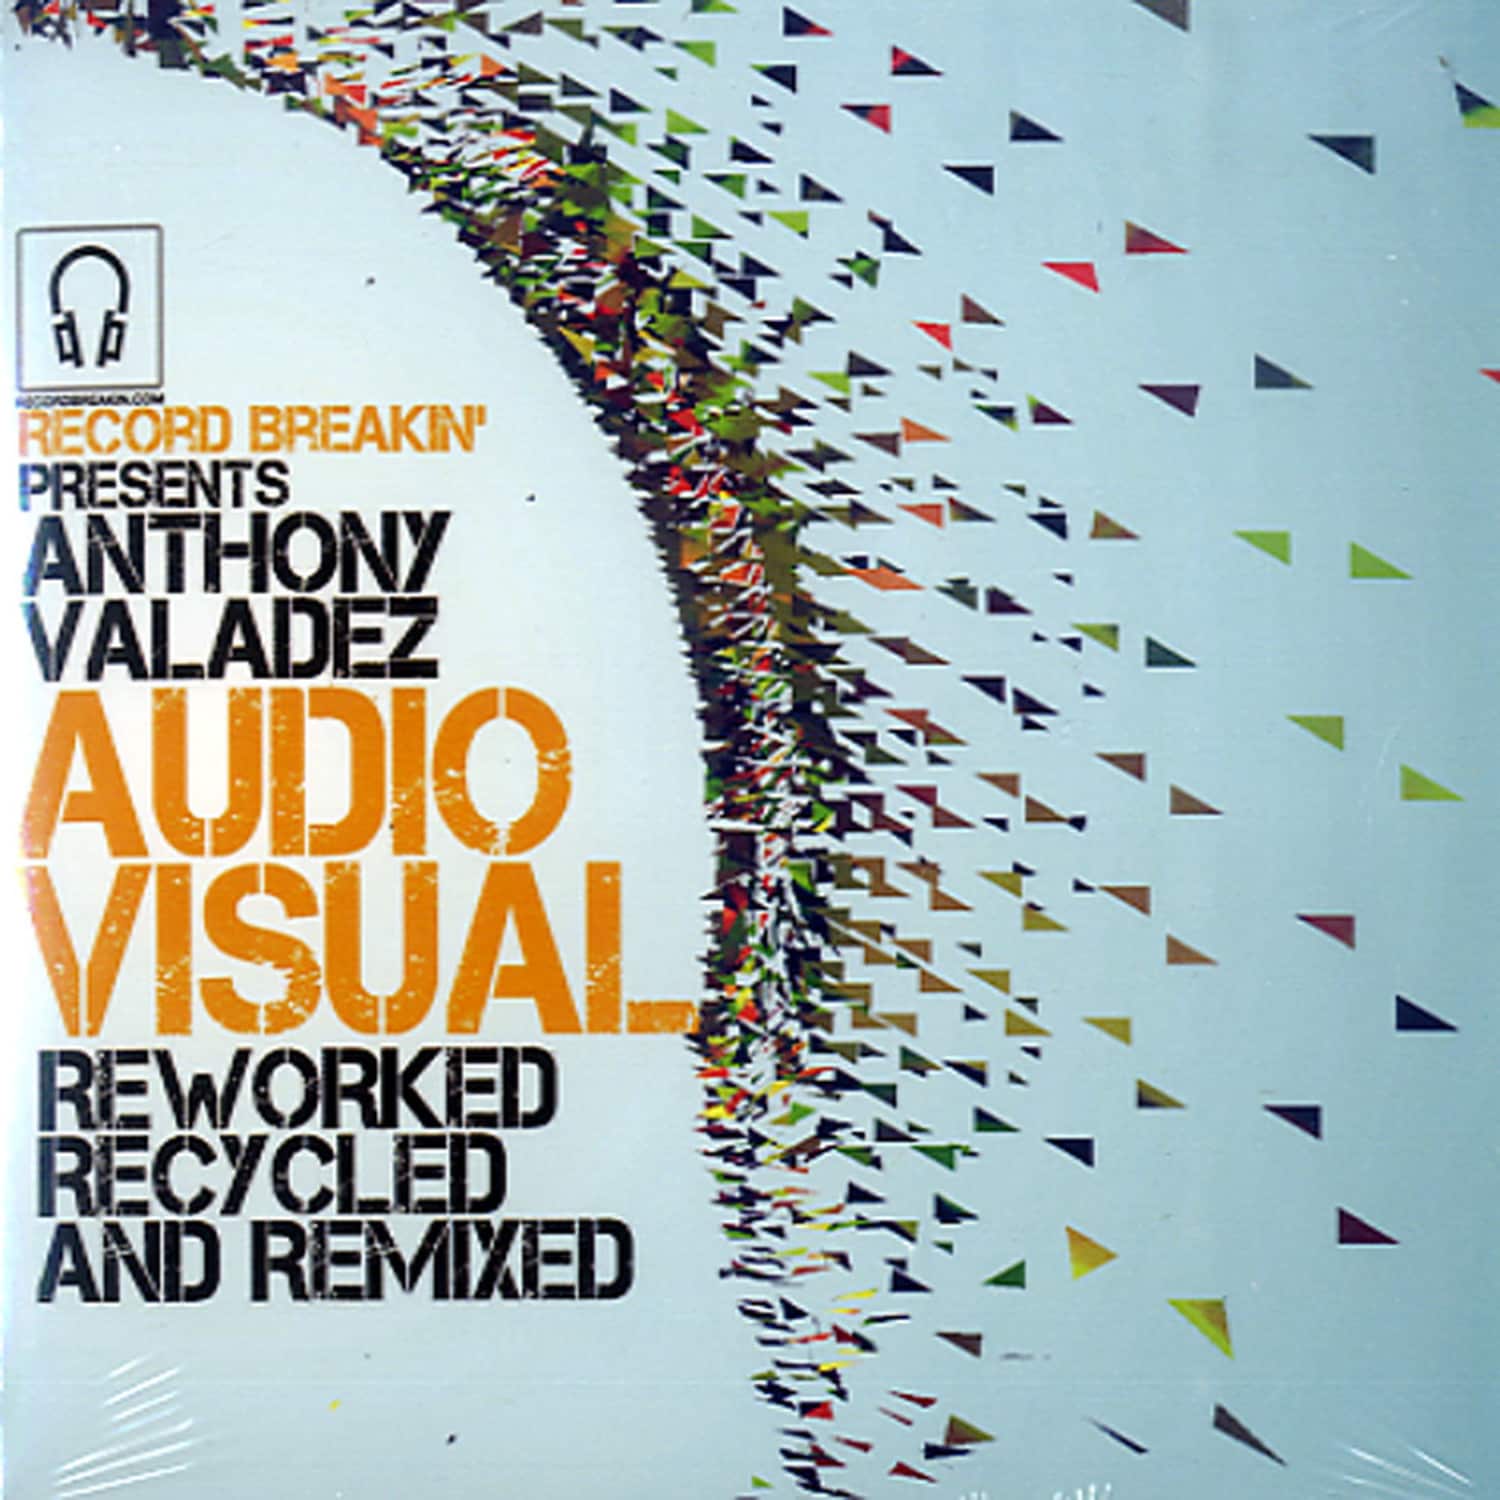 Anthony Valdez - AUDIO VISUAL REWORKED RECYCLED AND REMIXED 